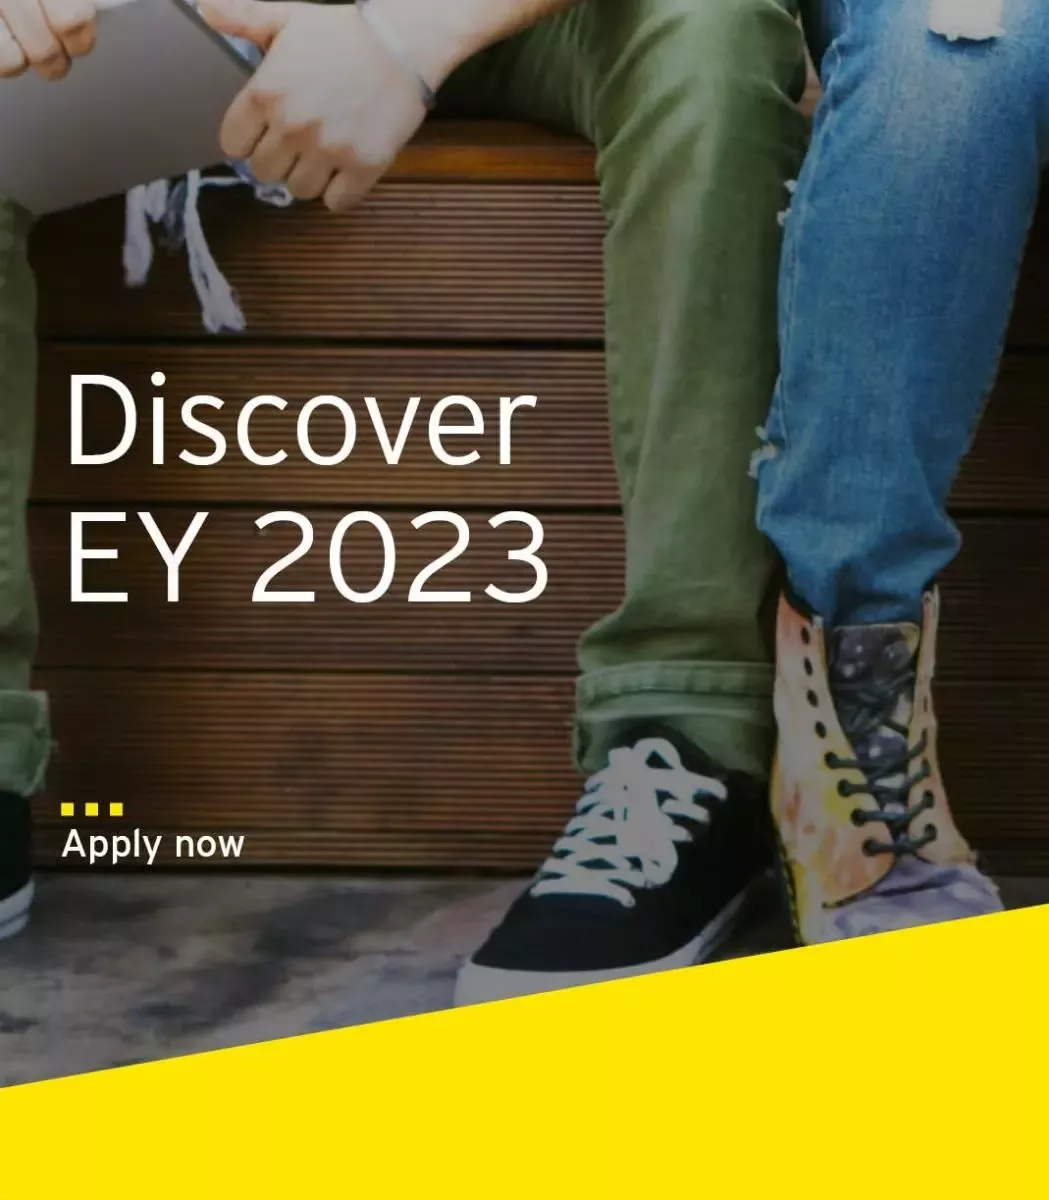 "Discover EY 2023" with aspiring employees sitting on a bench